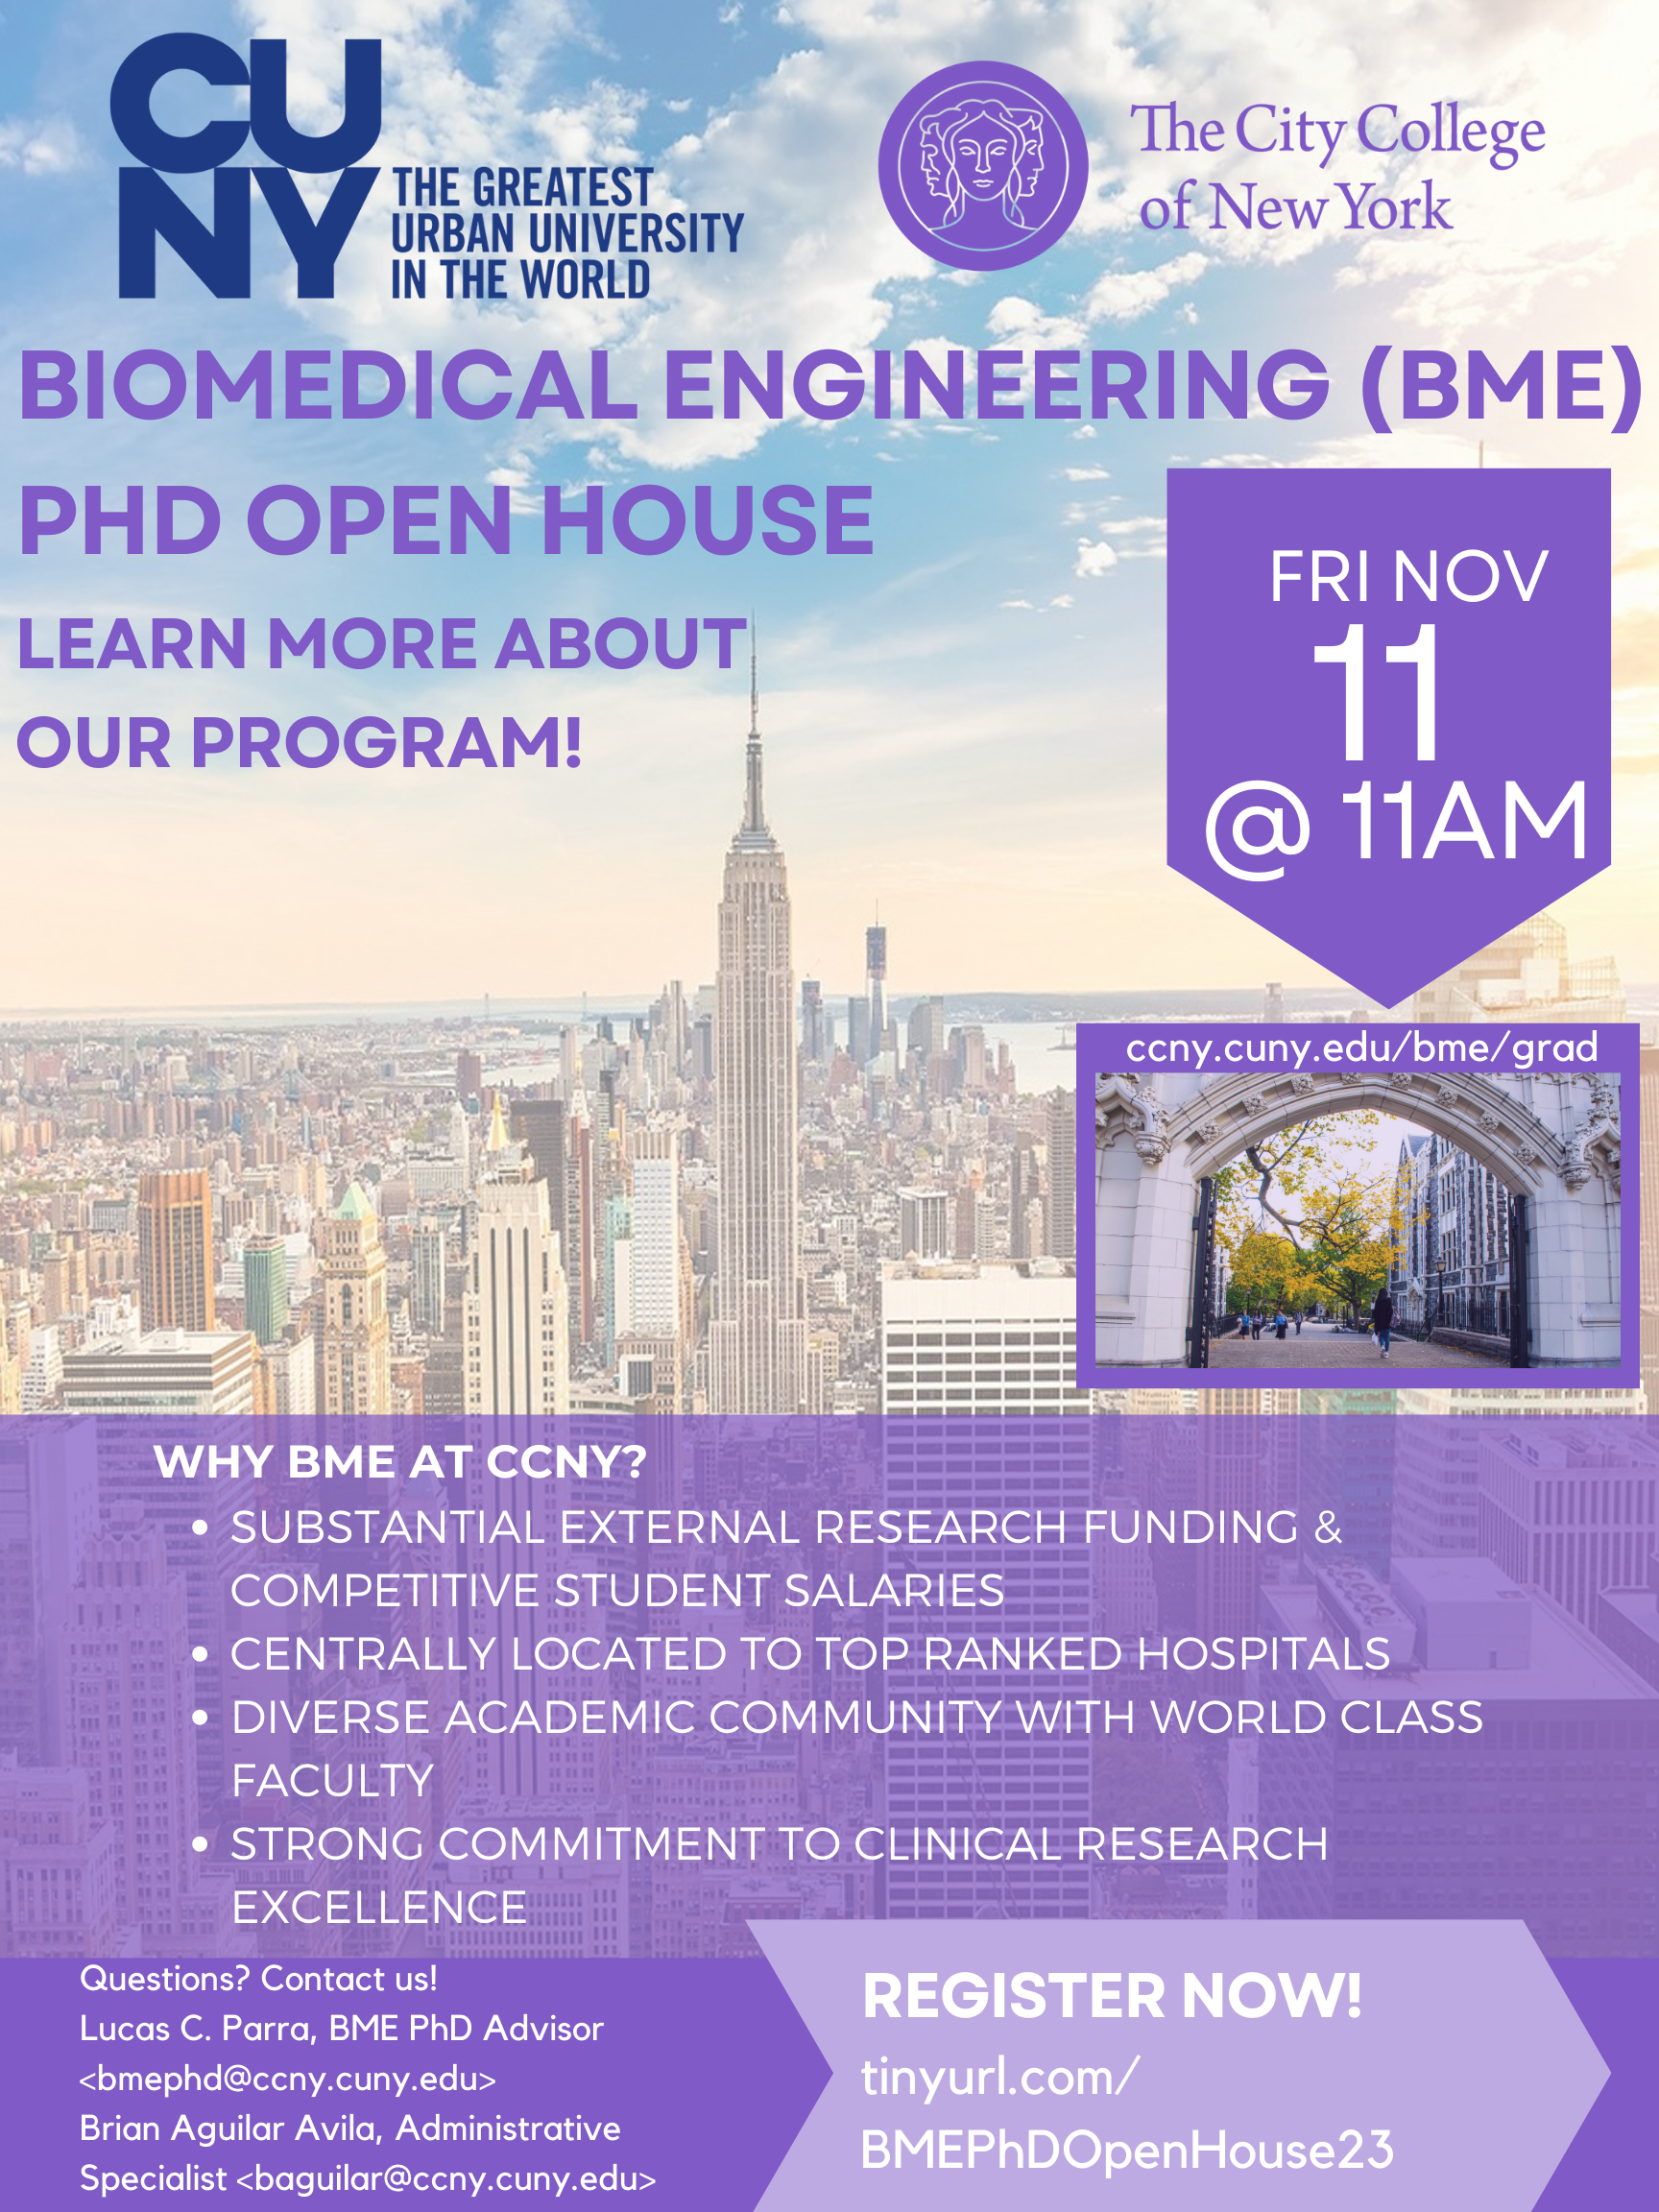 BIOMEDICAL ENGINEERING (BME) PHD OPEN HOUSE FLYER